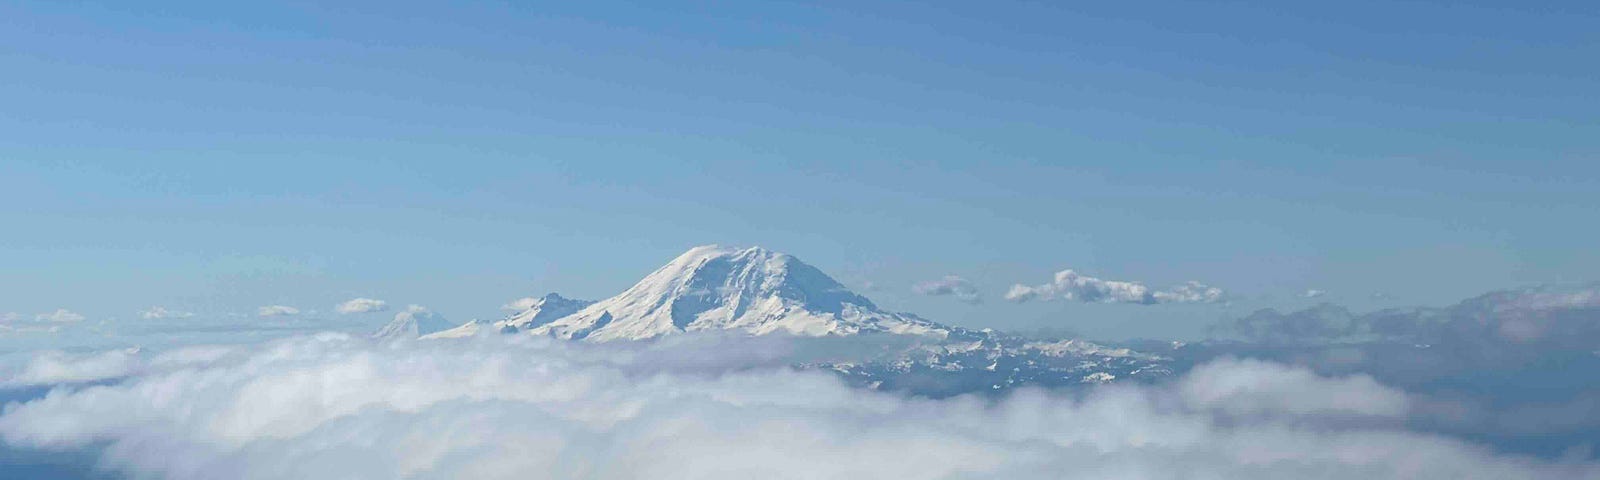 Snow-covered mountain peak of Mount Rainier rising above the clouds